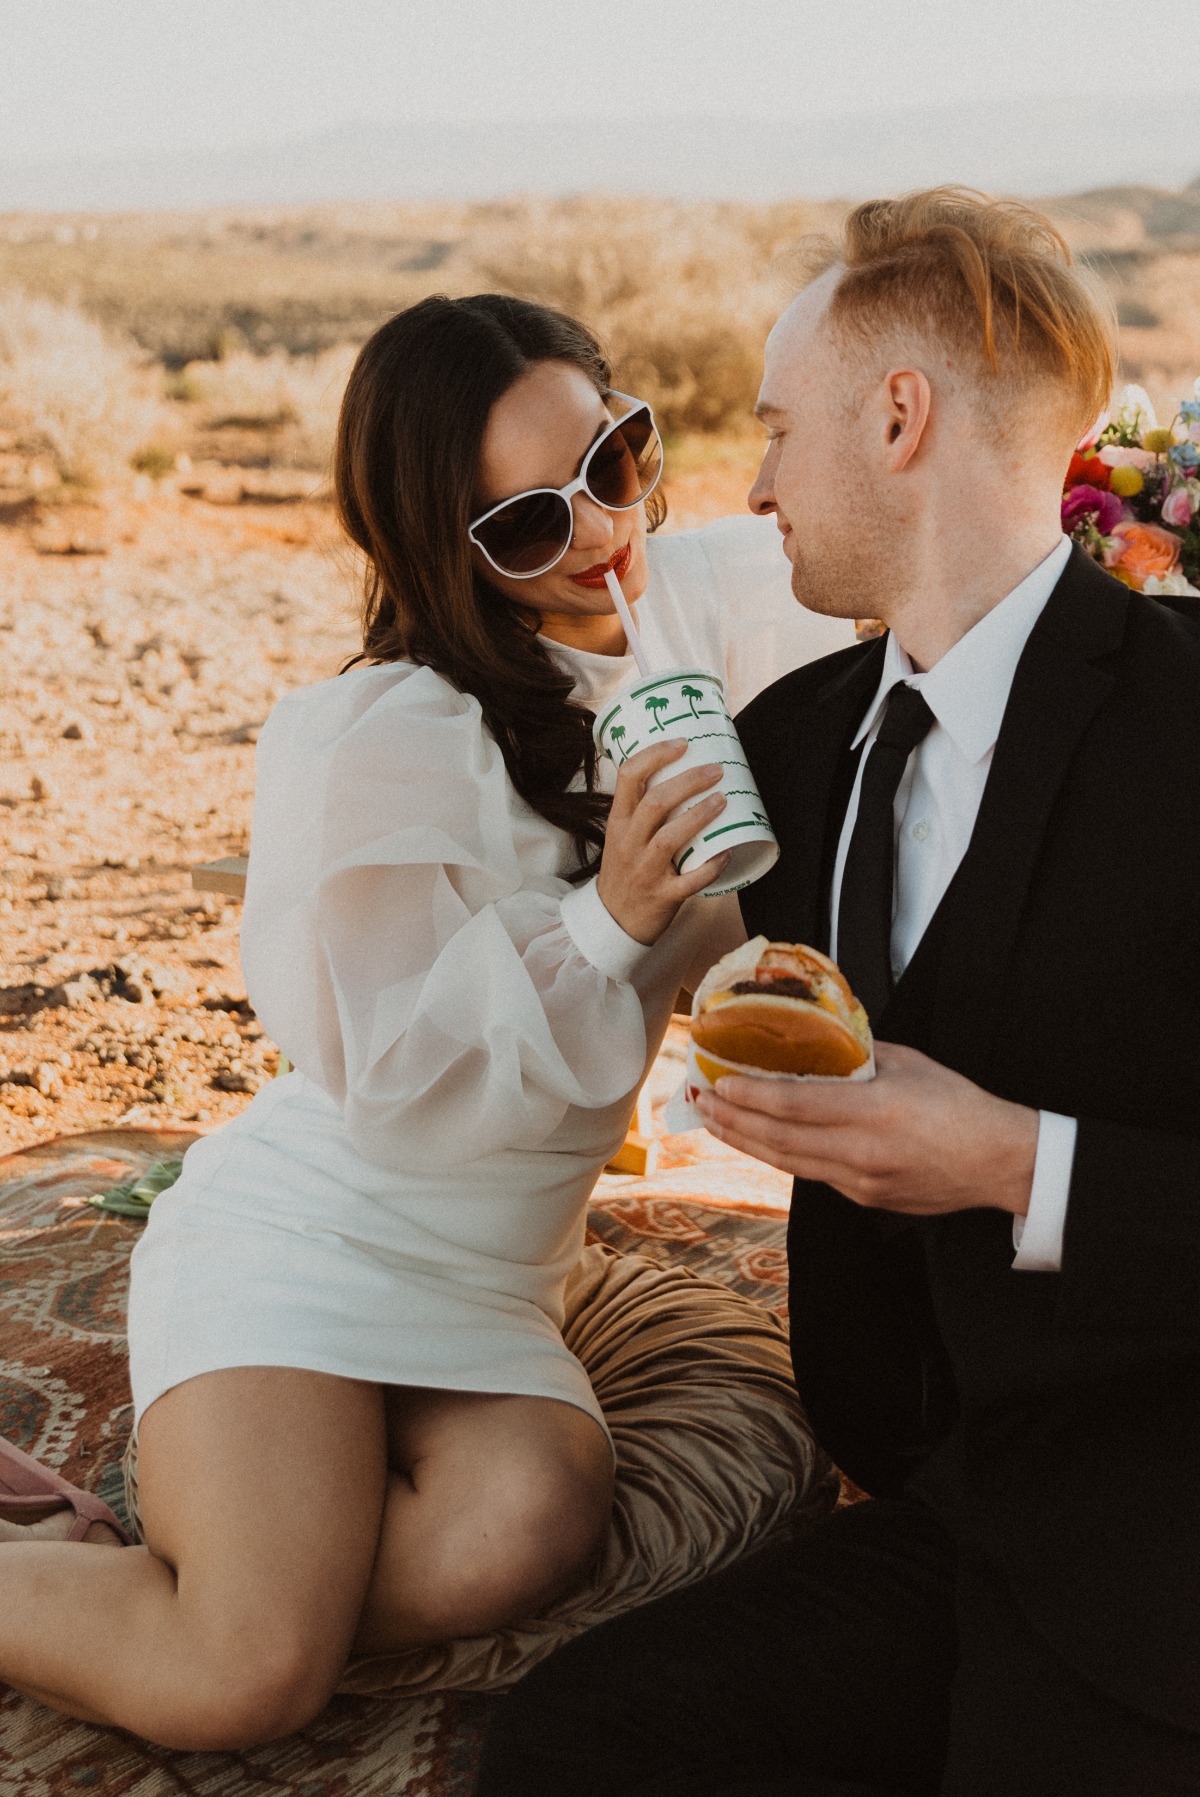 Bride in sunglasses drinking a soda while groom eats an In-n-Out burger